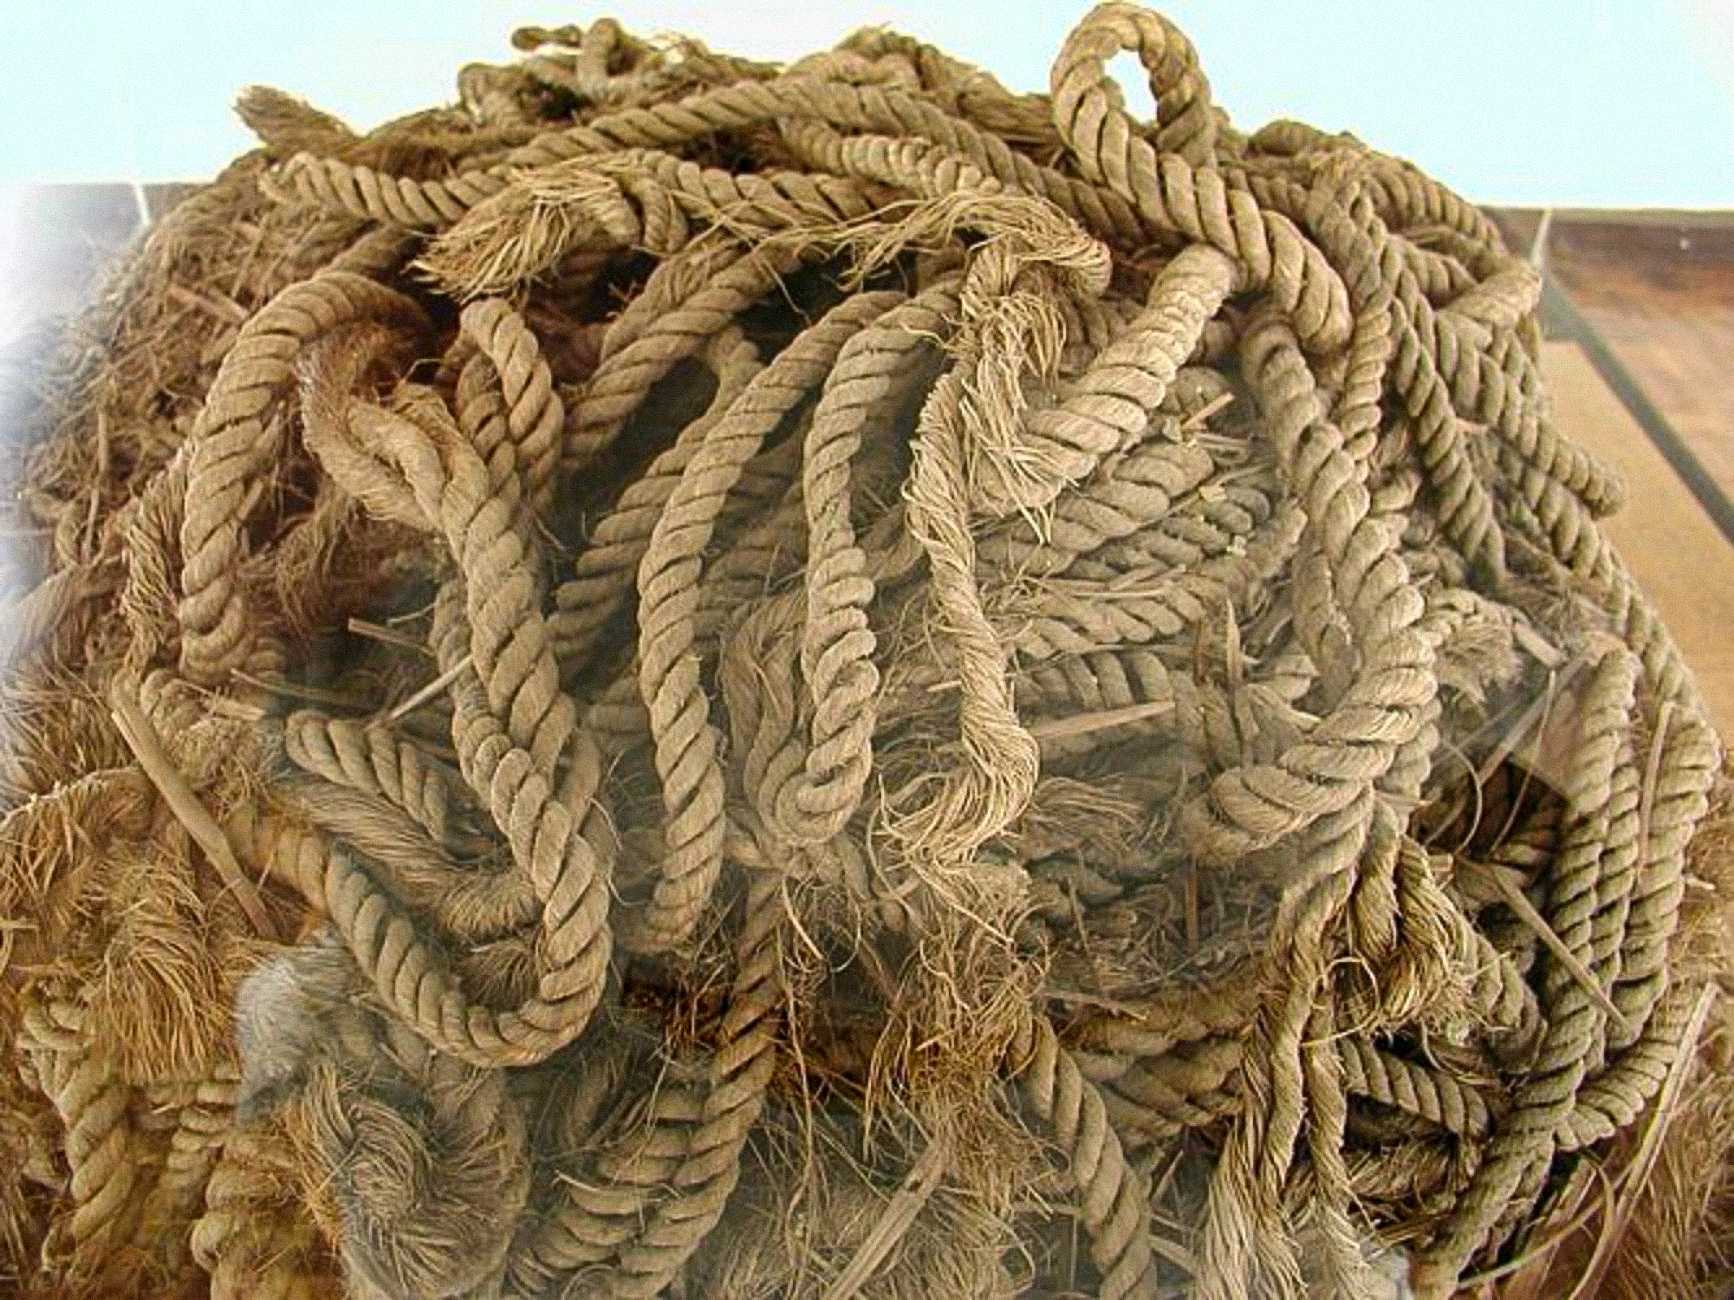 Original rope discovered with the Khufu ship